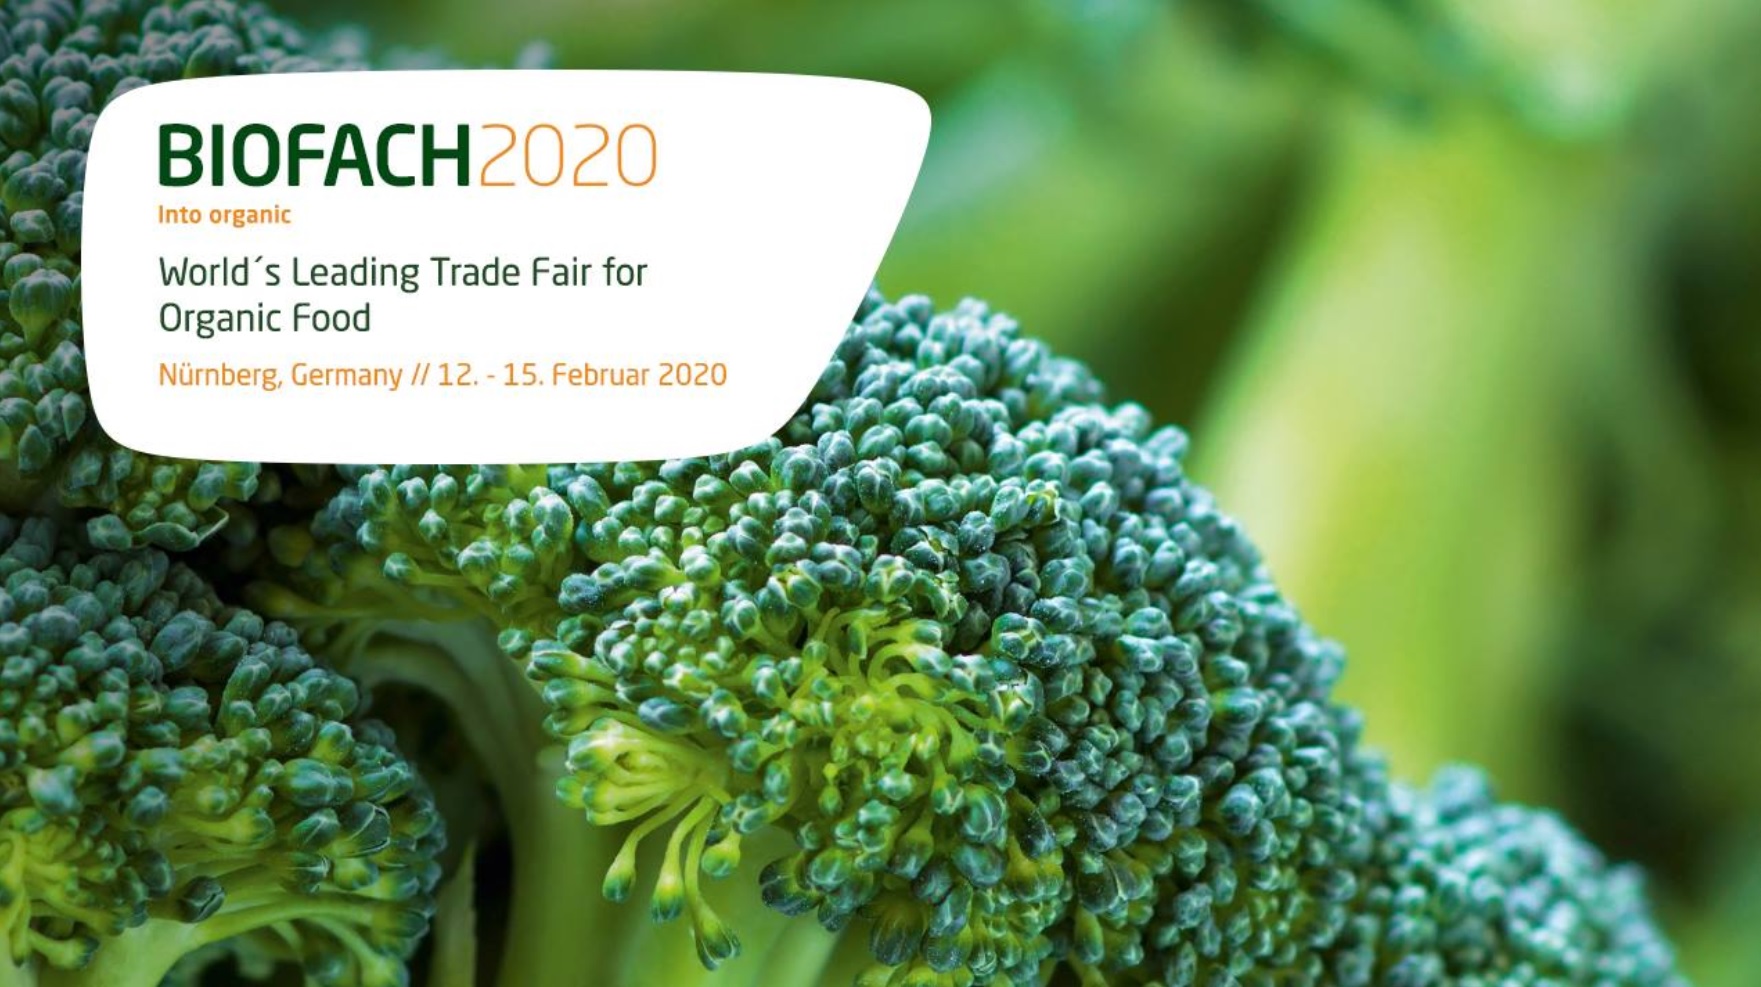 Visimex confirm to join Biofach 2020 in Germany